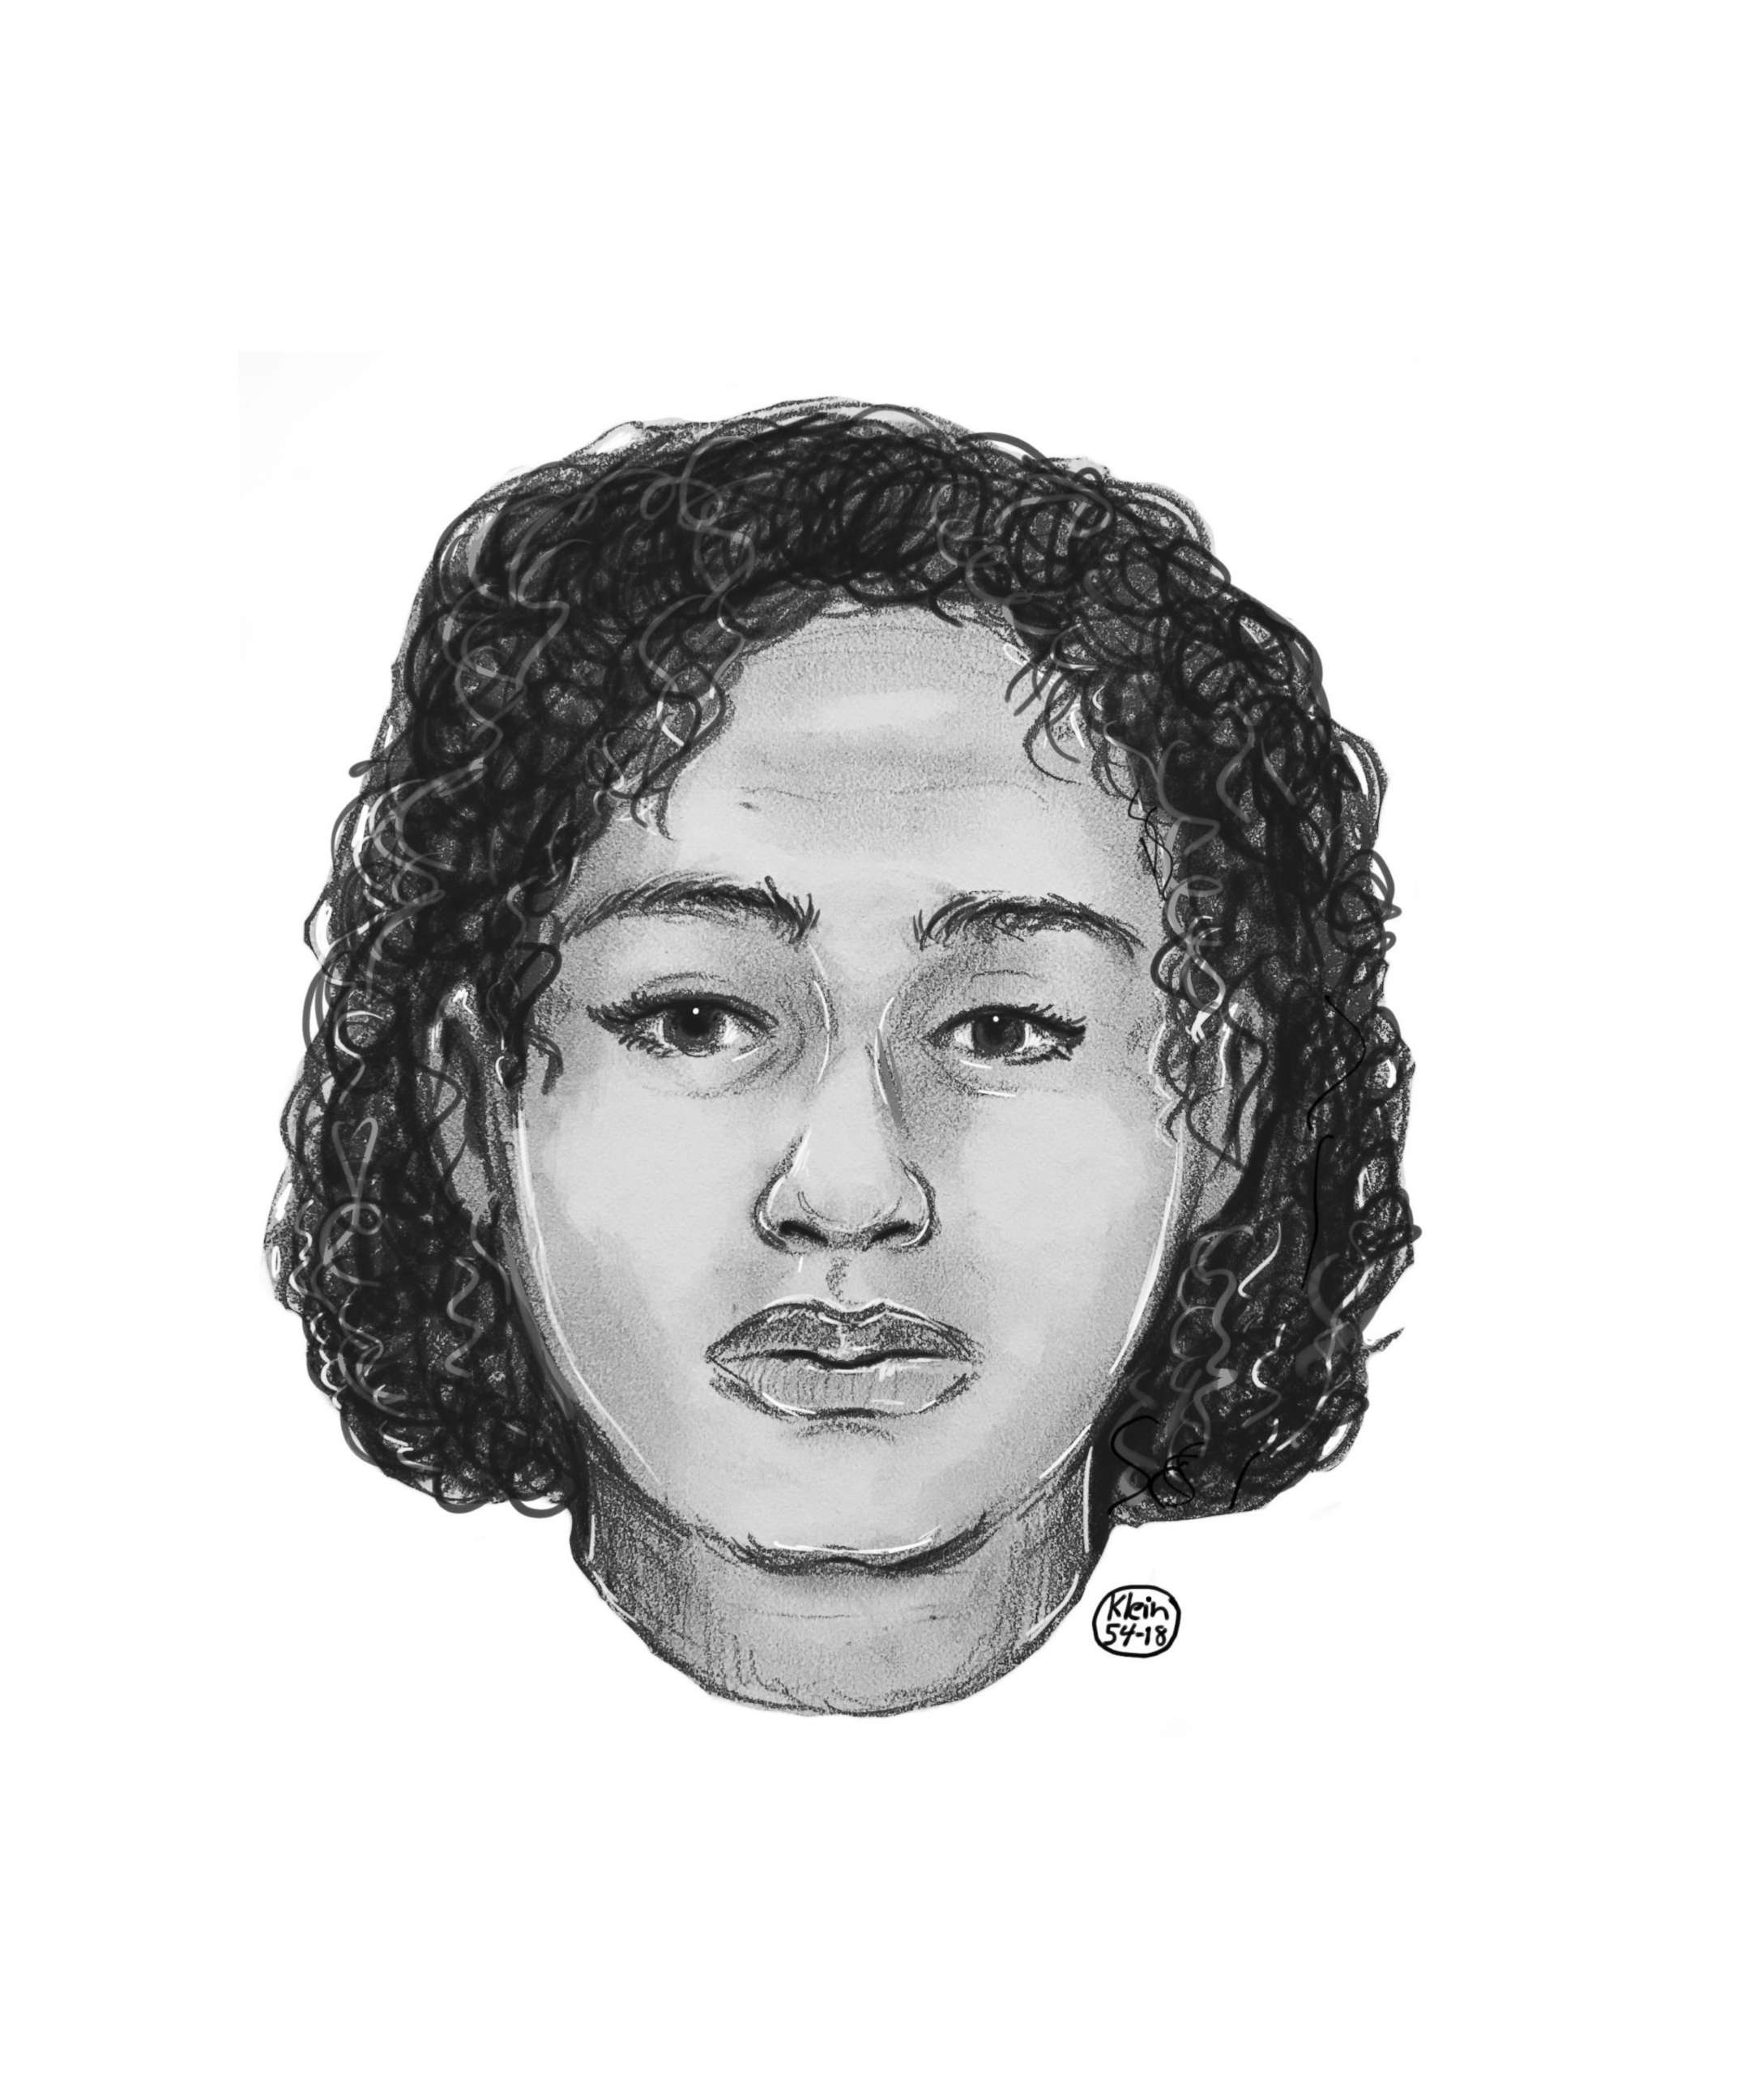 PHOTO: Police sketch of one of the two women found taped together in the Hudson River on Oct. 24, 2018.